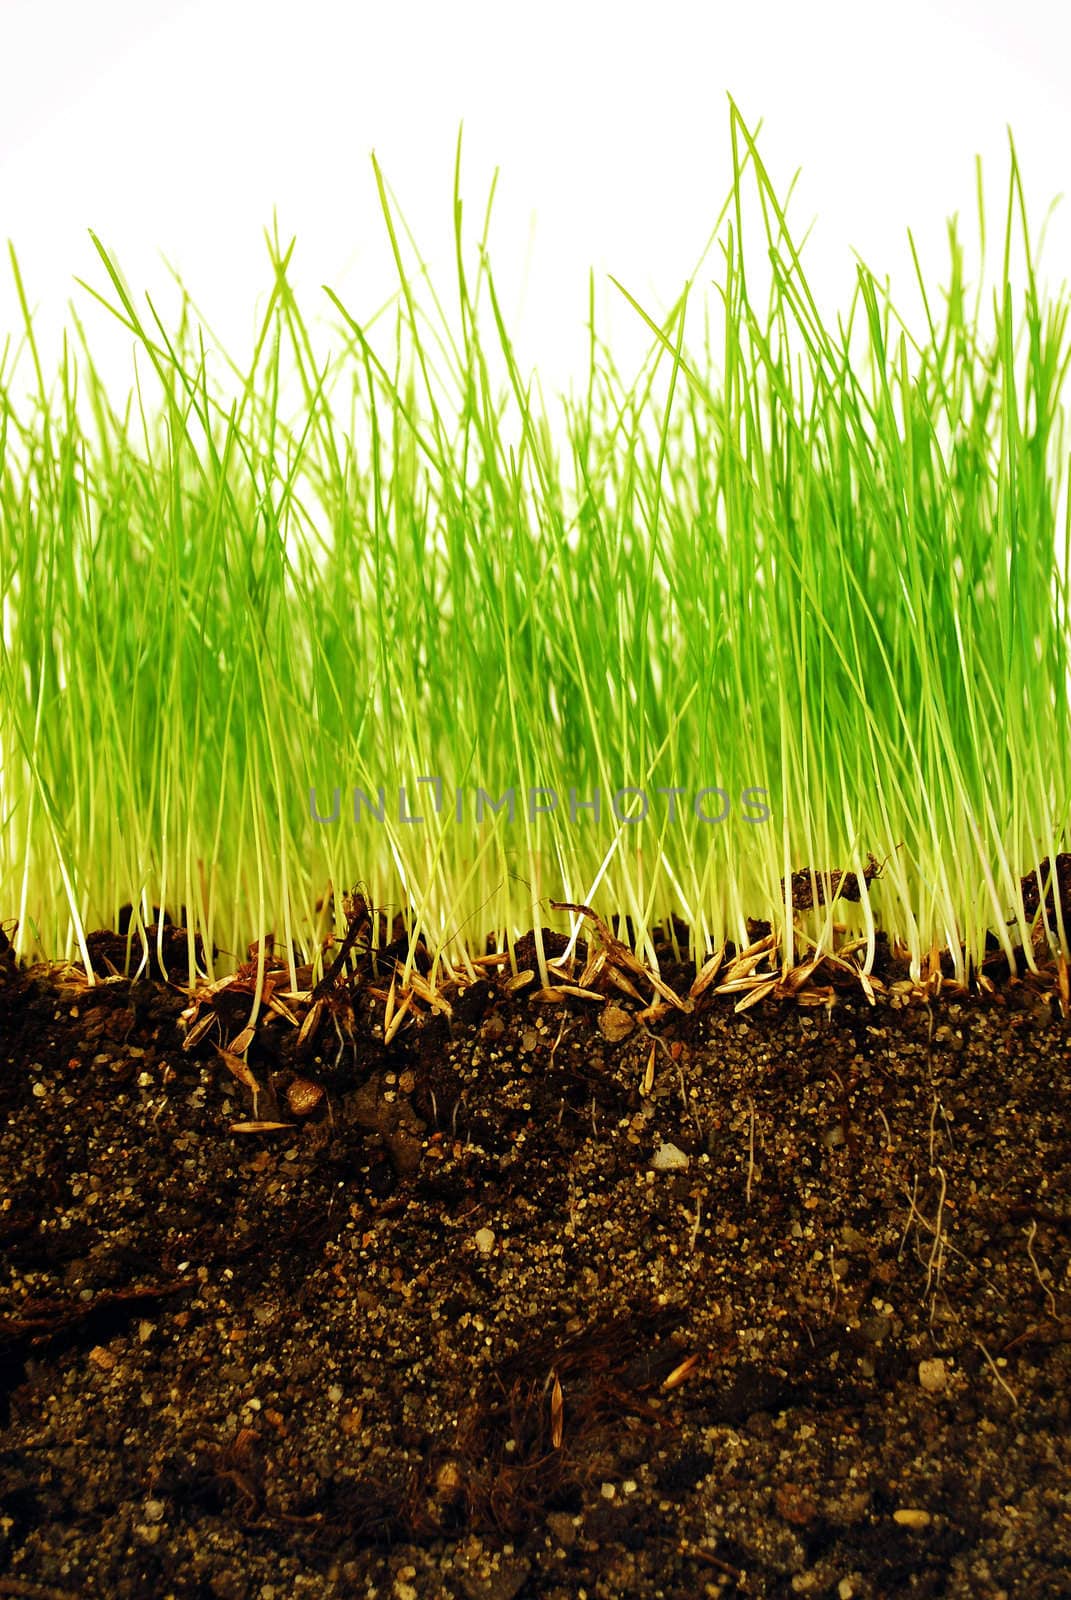 Growing grass with roots in earth in close-up